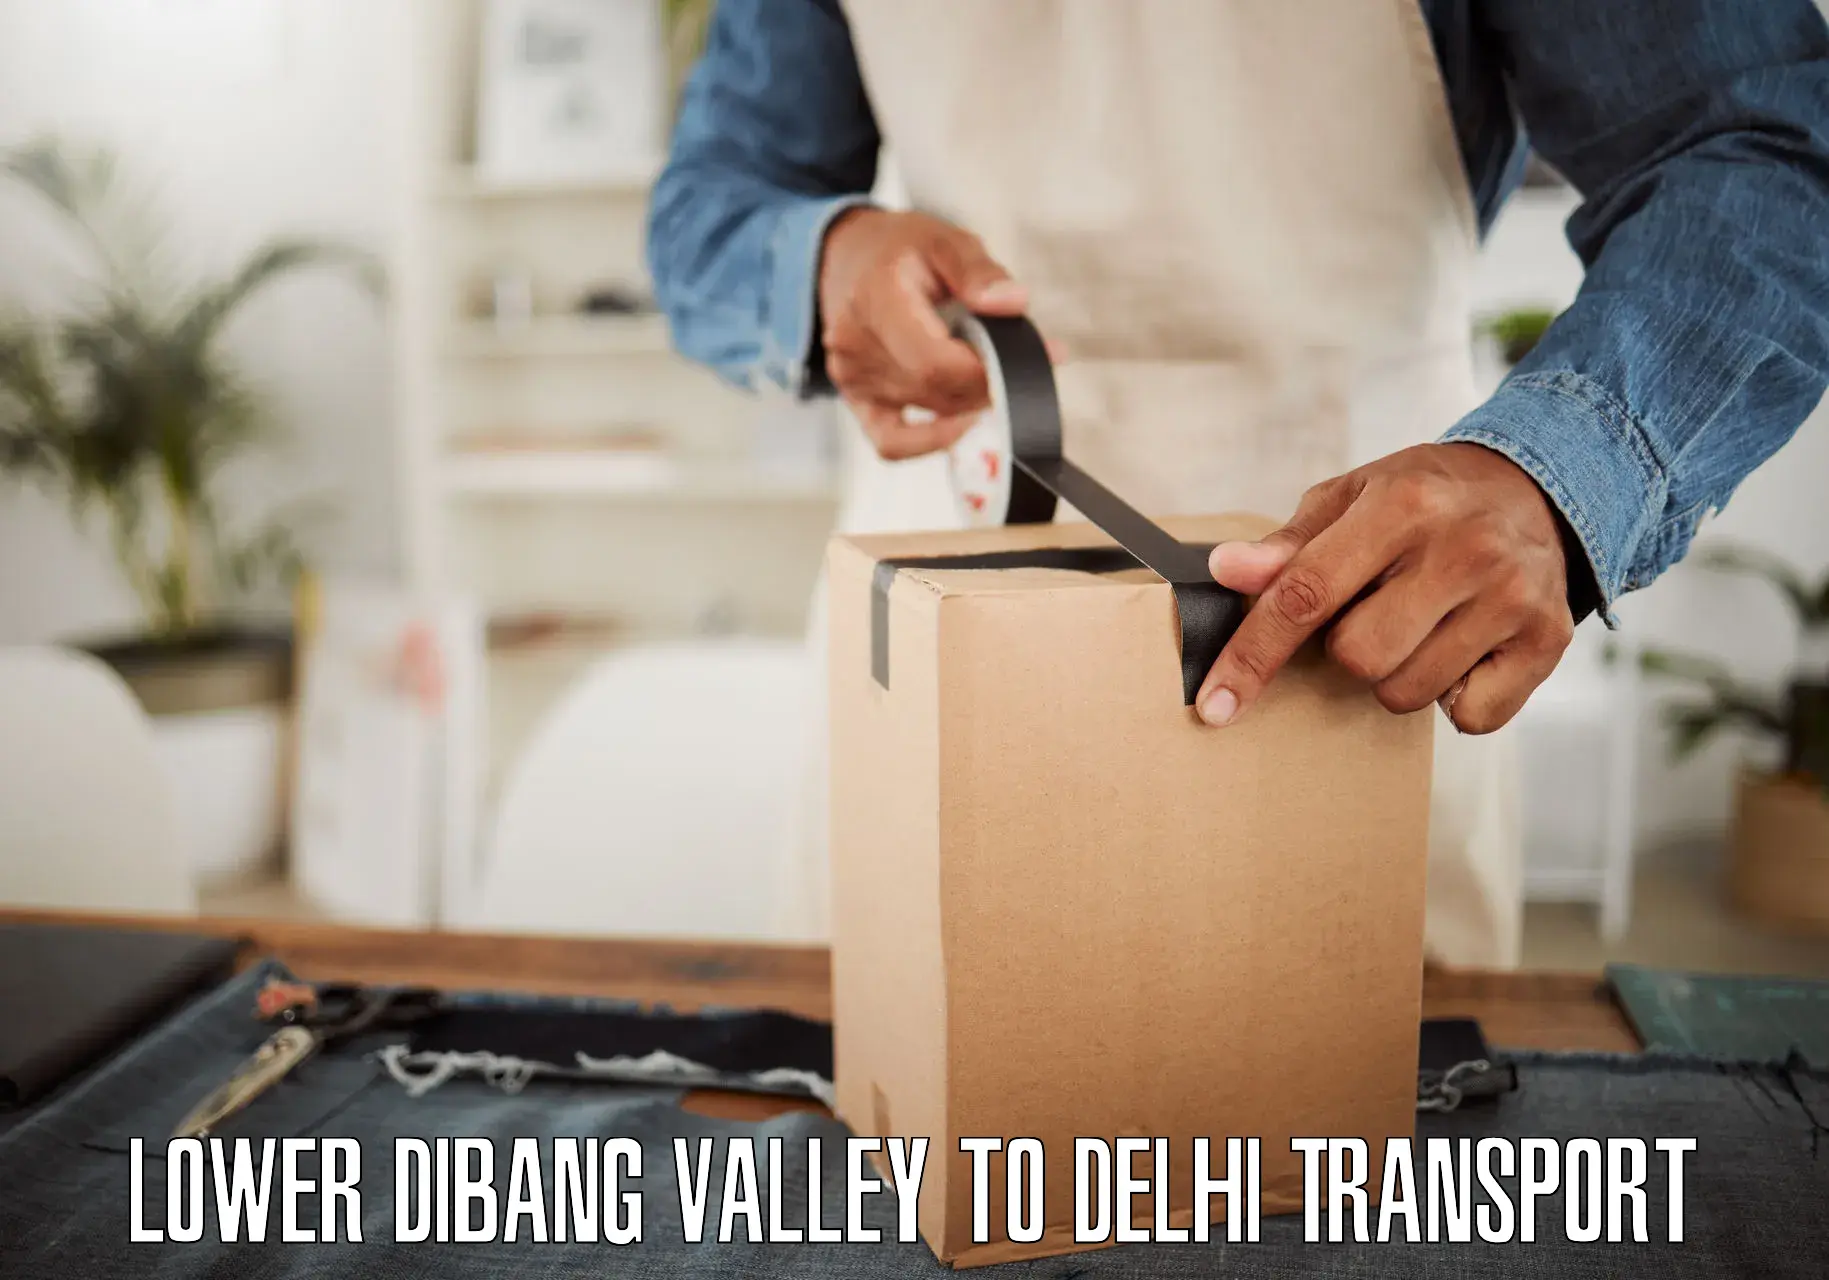 Transport in sharing Lower Dibang Valley to Lodhi Road